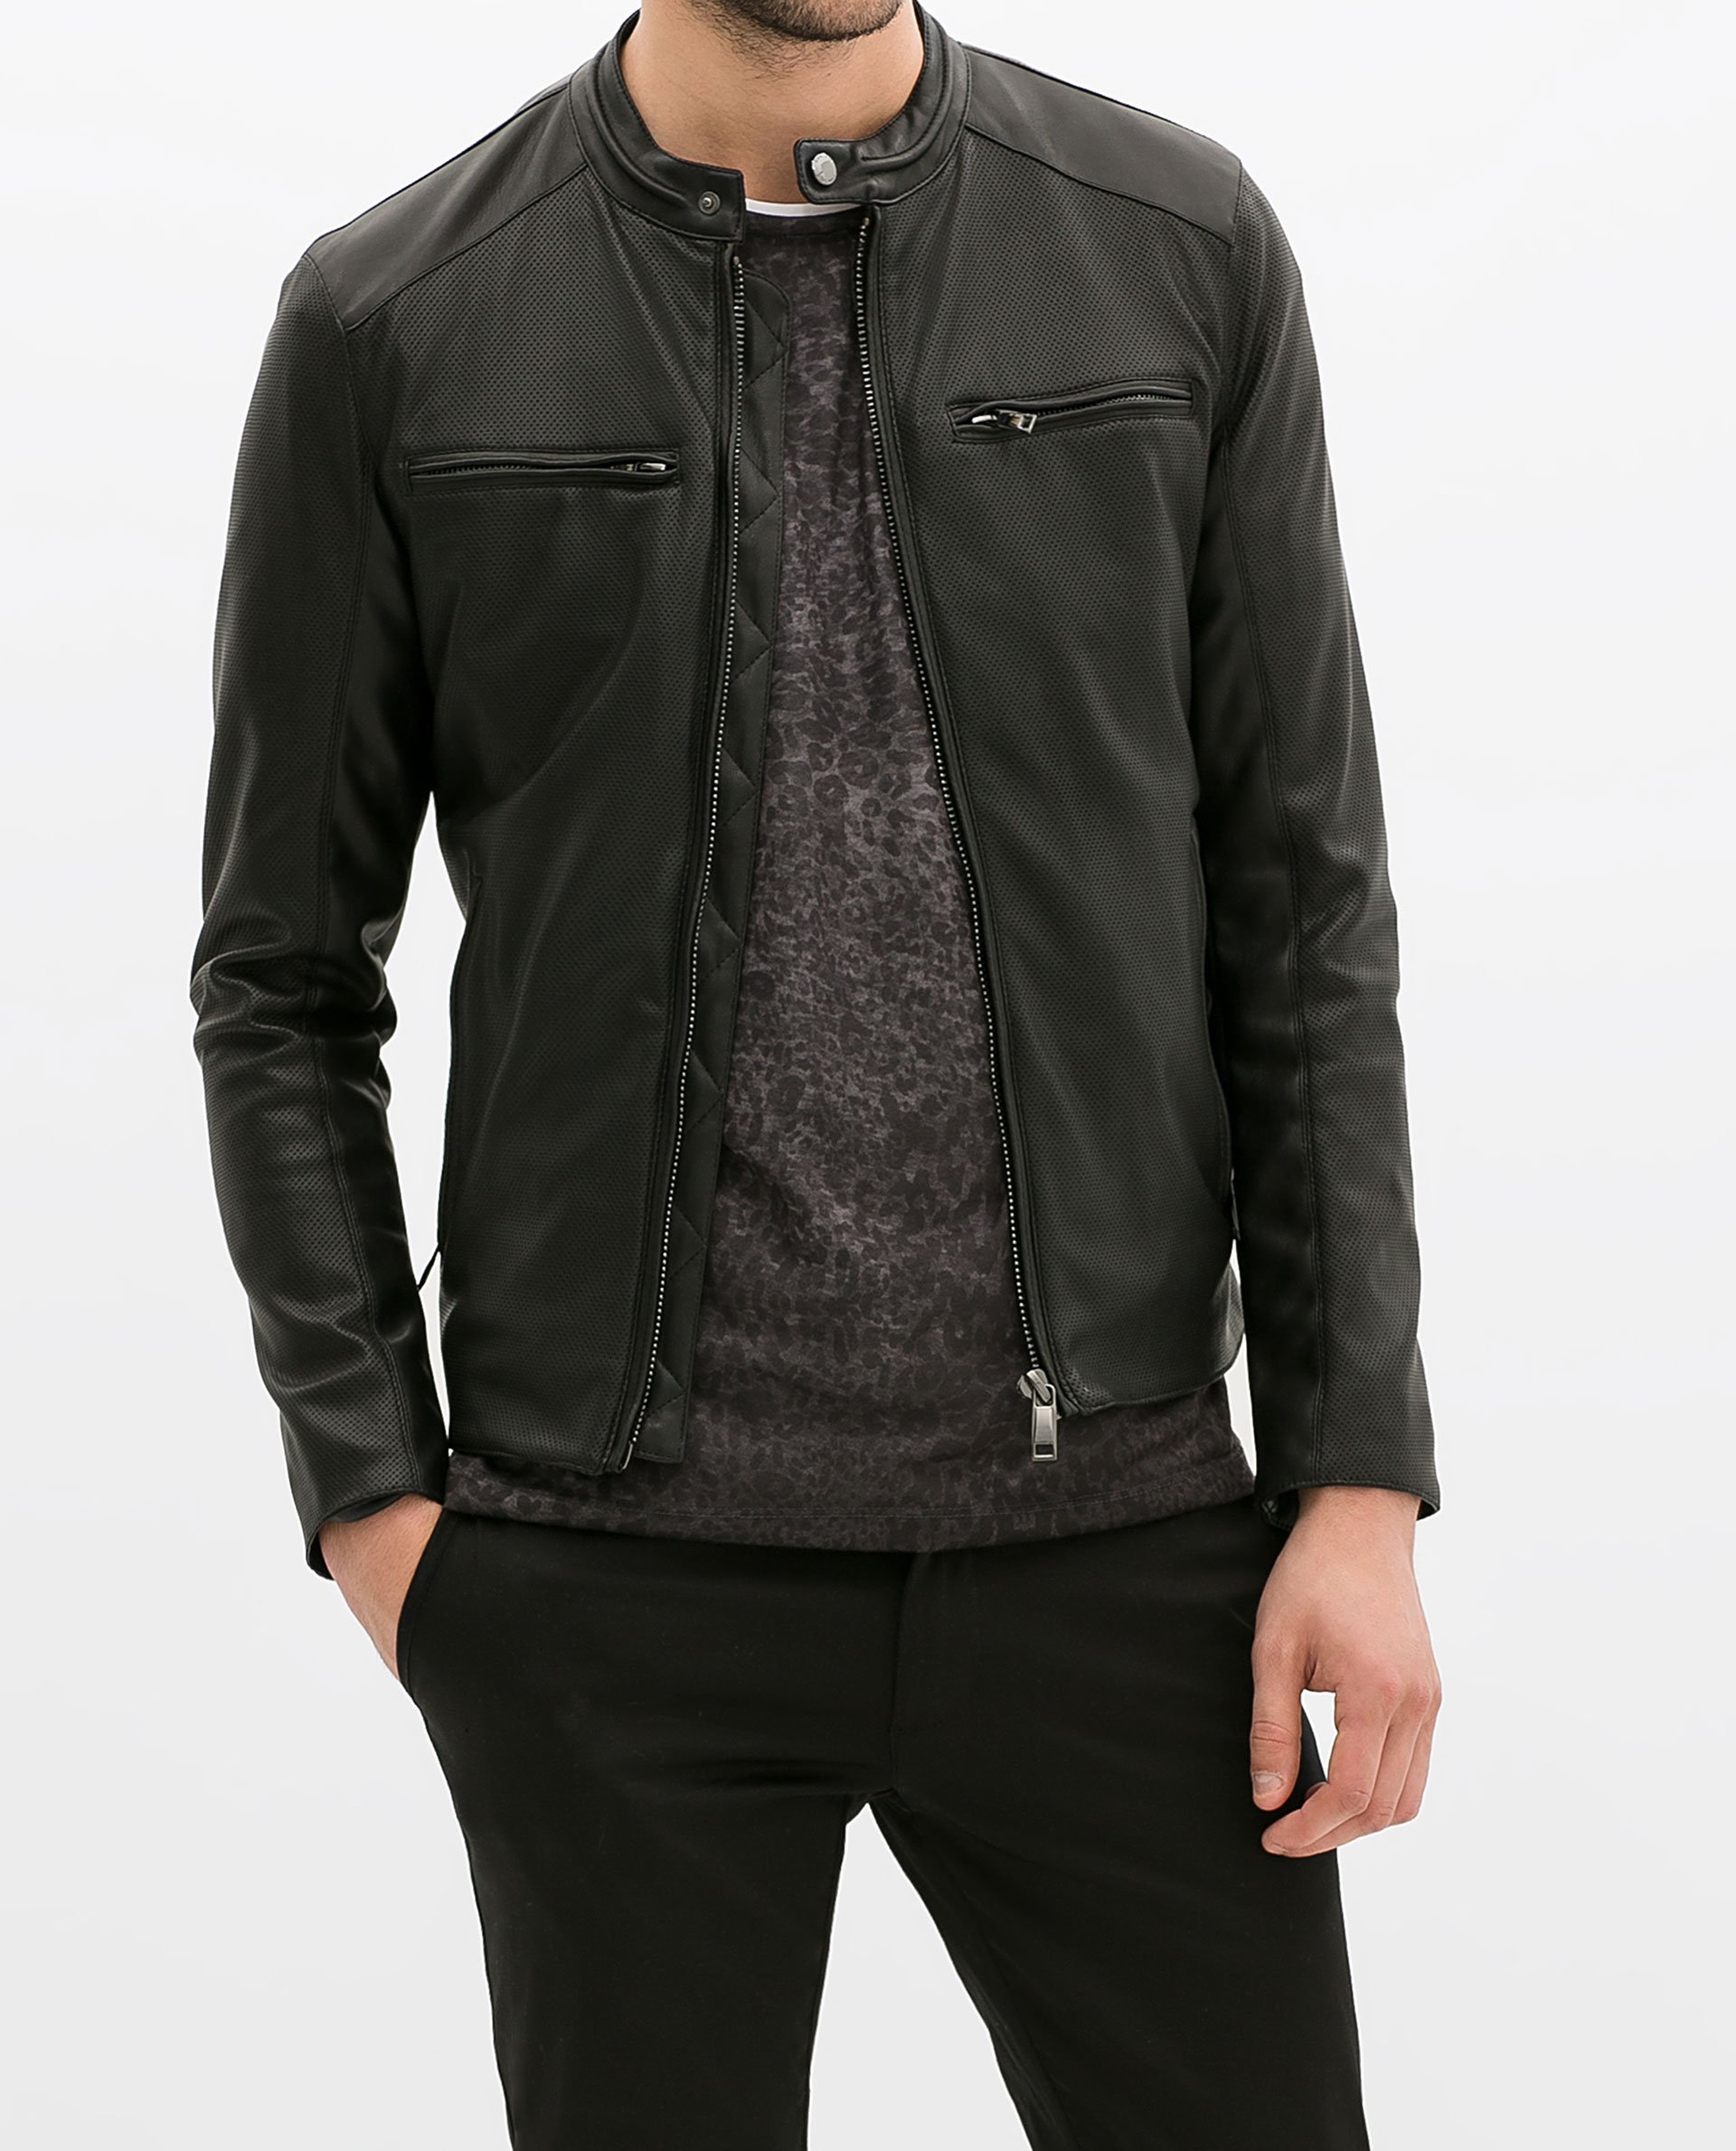  Zara  Perforated Faux Leather Jacket  in Black for Men  Lyst